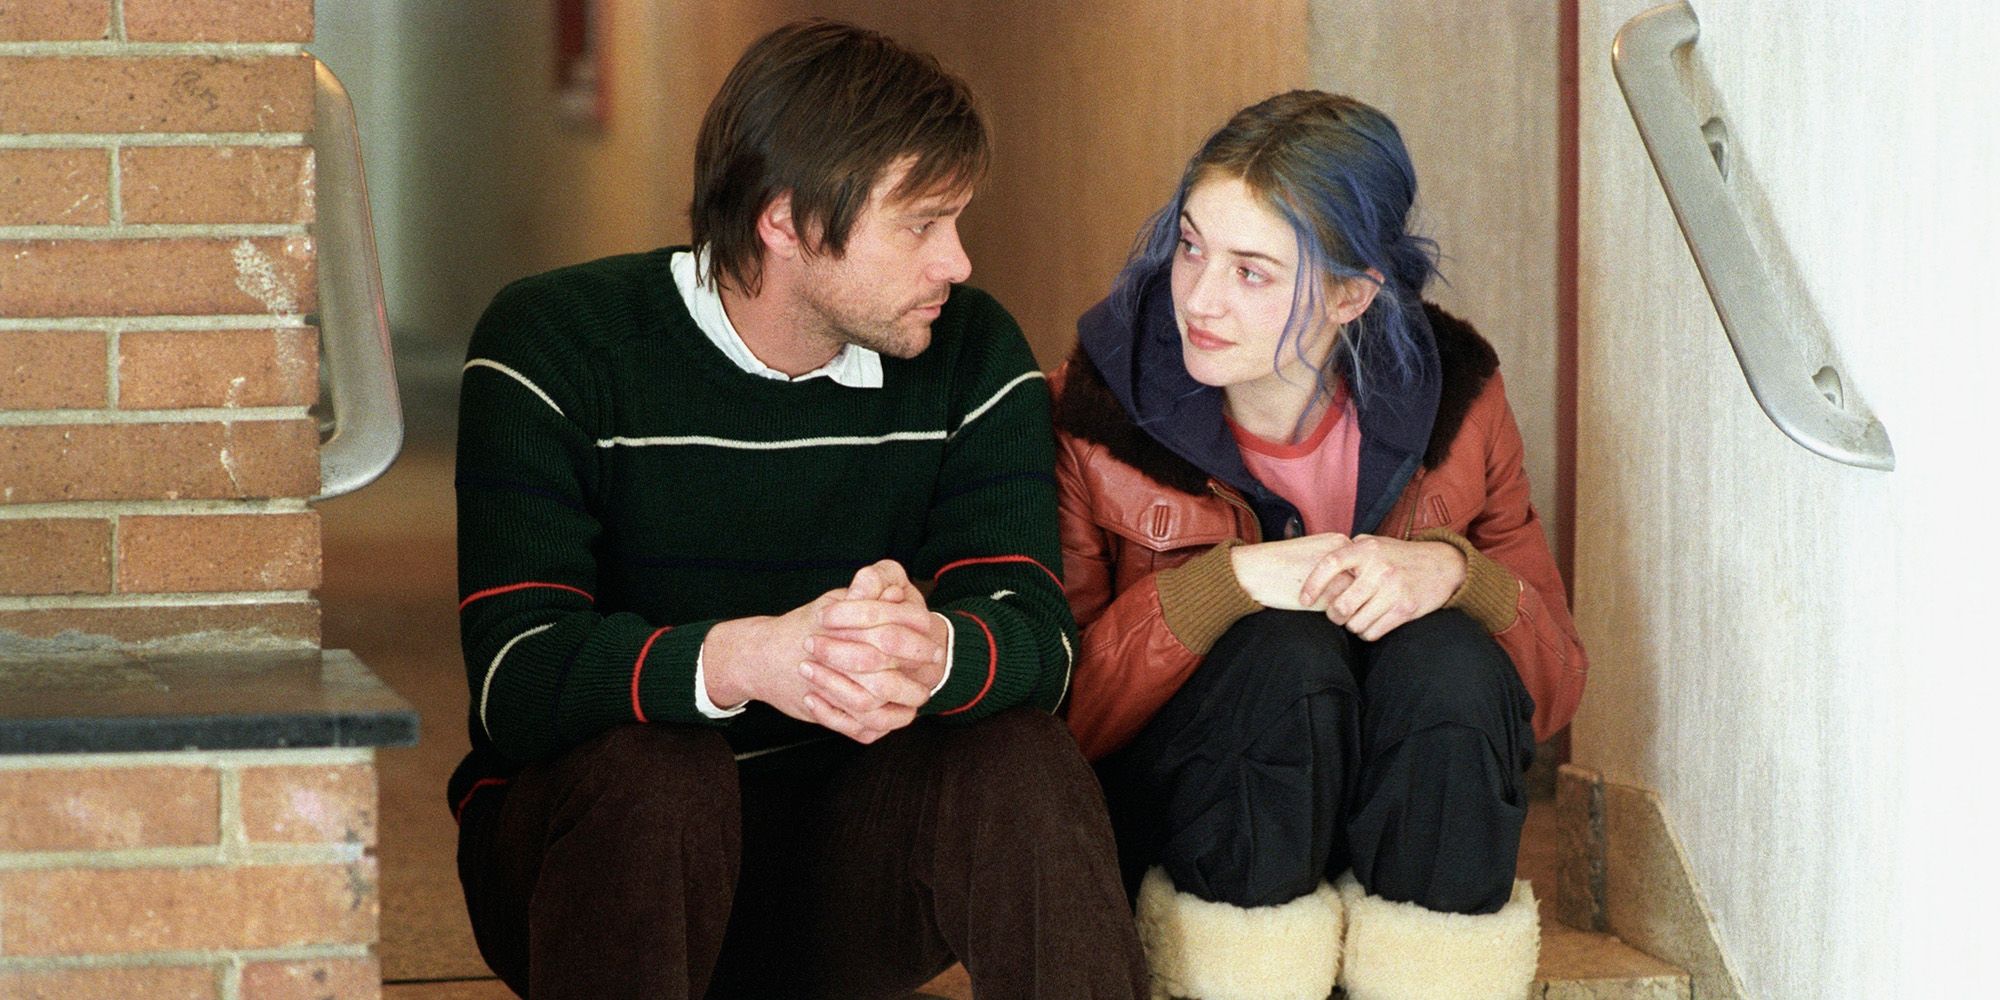 Joel and Clementine sat on a step in Eternal Sunshine